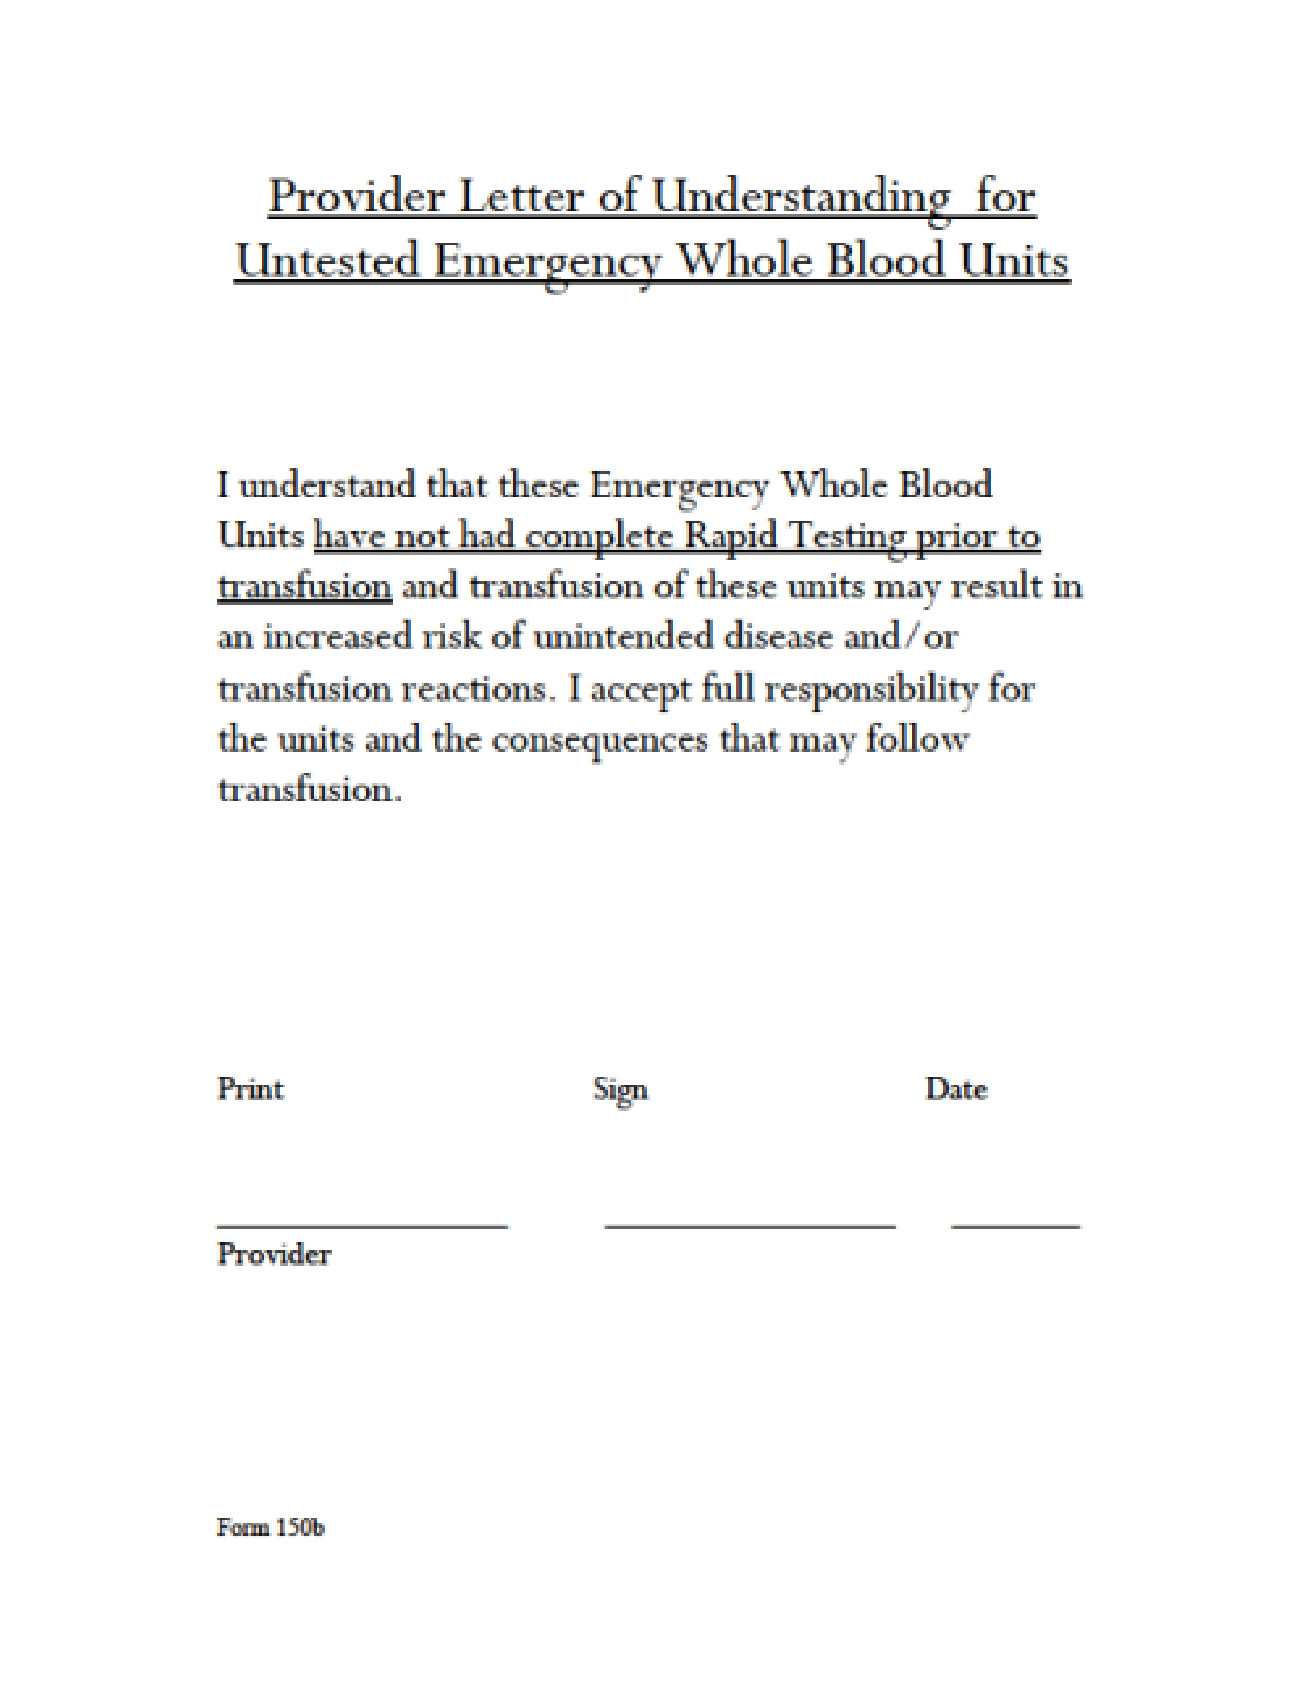 Form 150A: Emergency Release Letter of Understanding (tested)